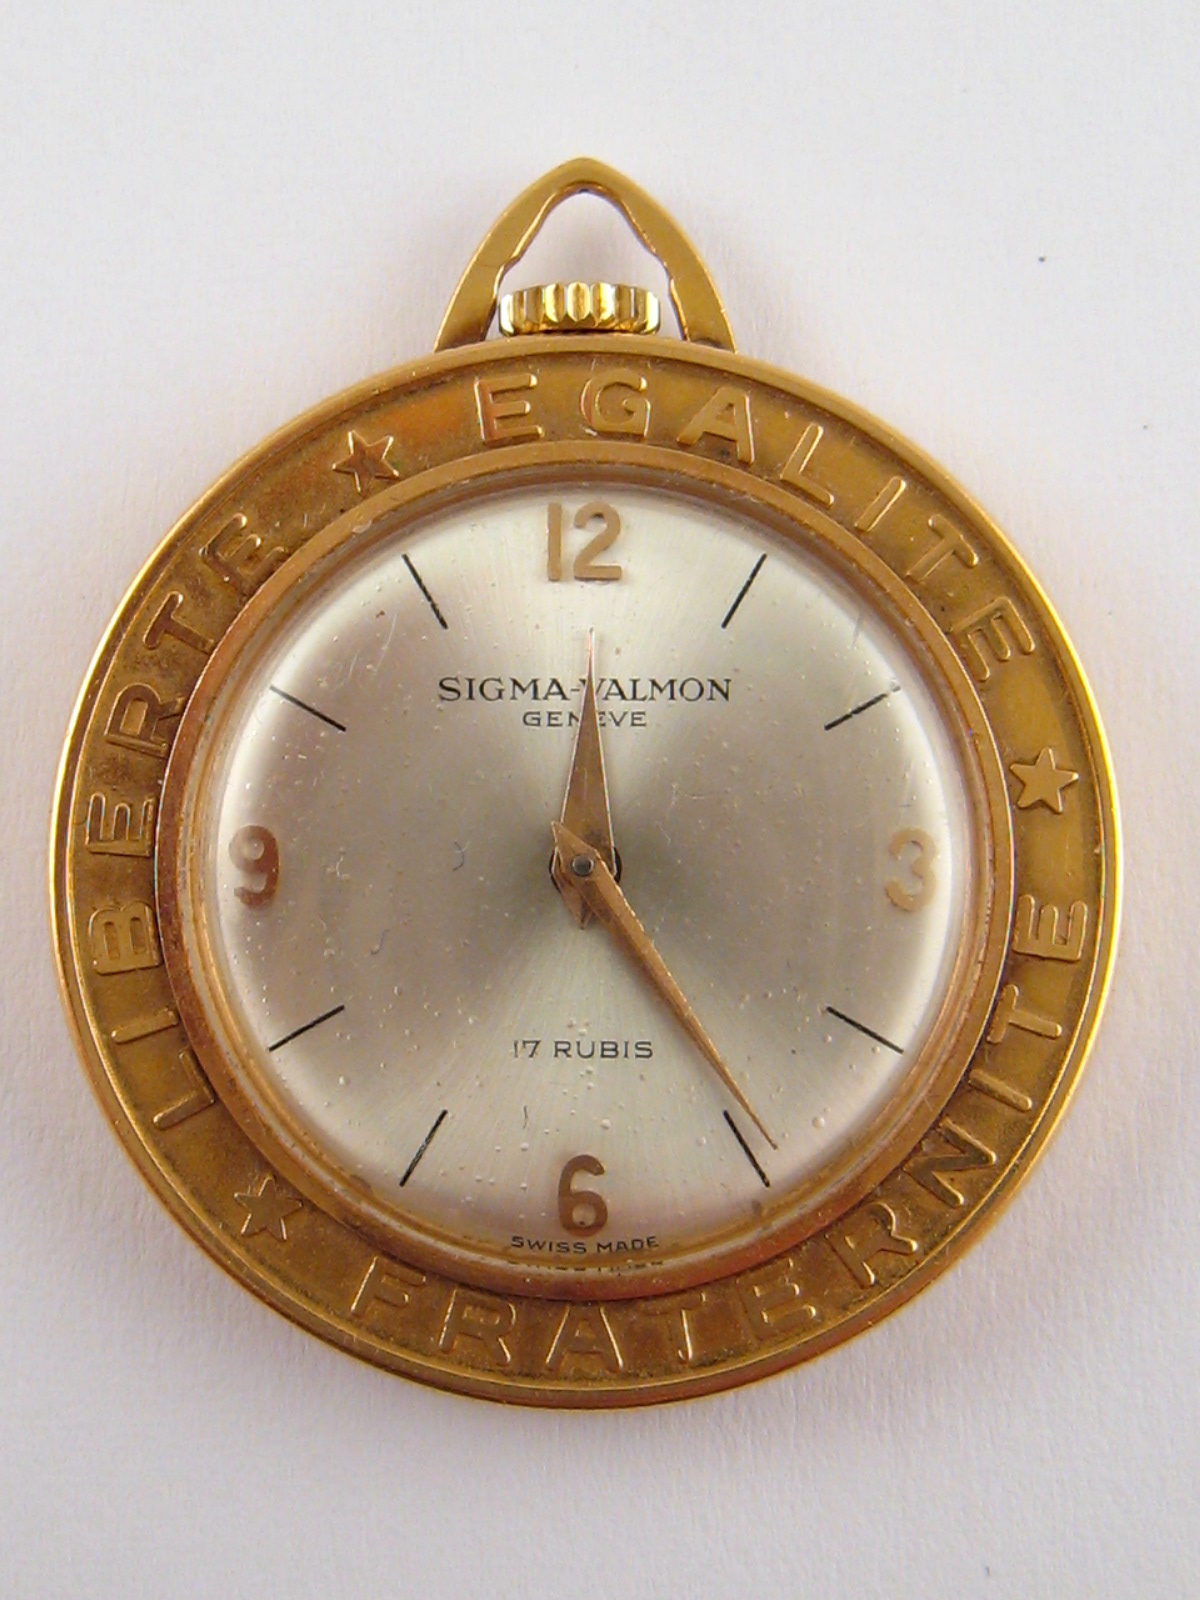 An 18 carat gold coin watch, unascribed marks, case approx 33mm wide, 20.6 gms.